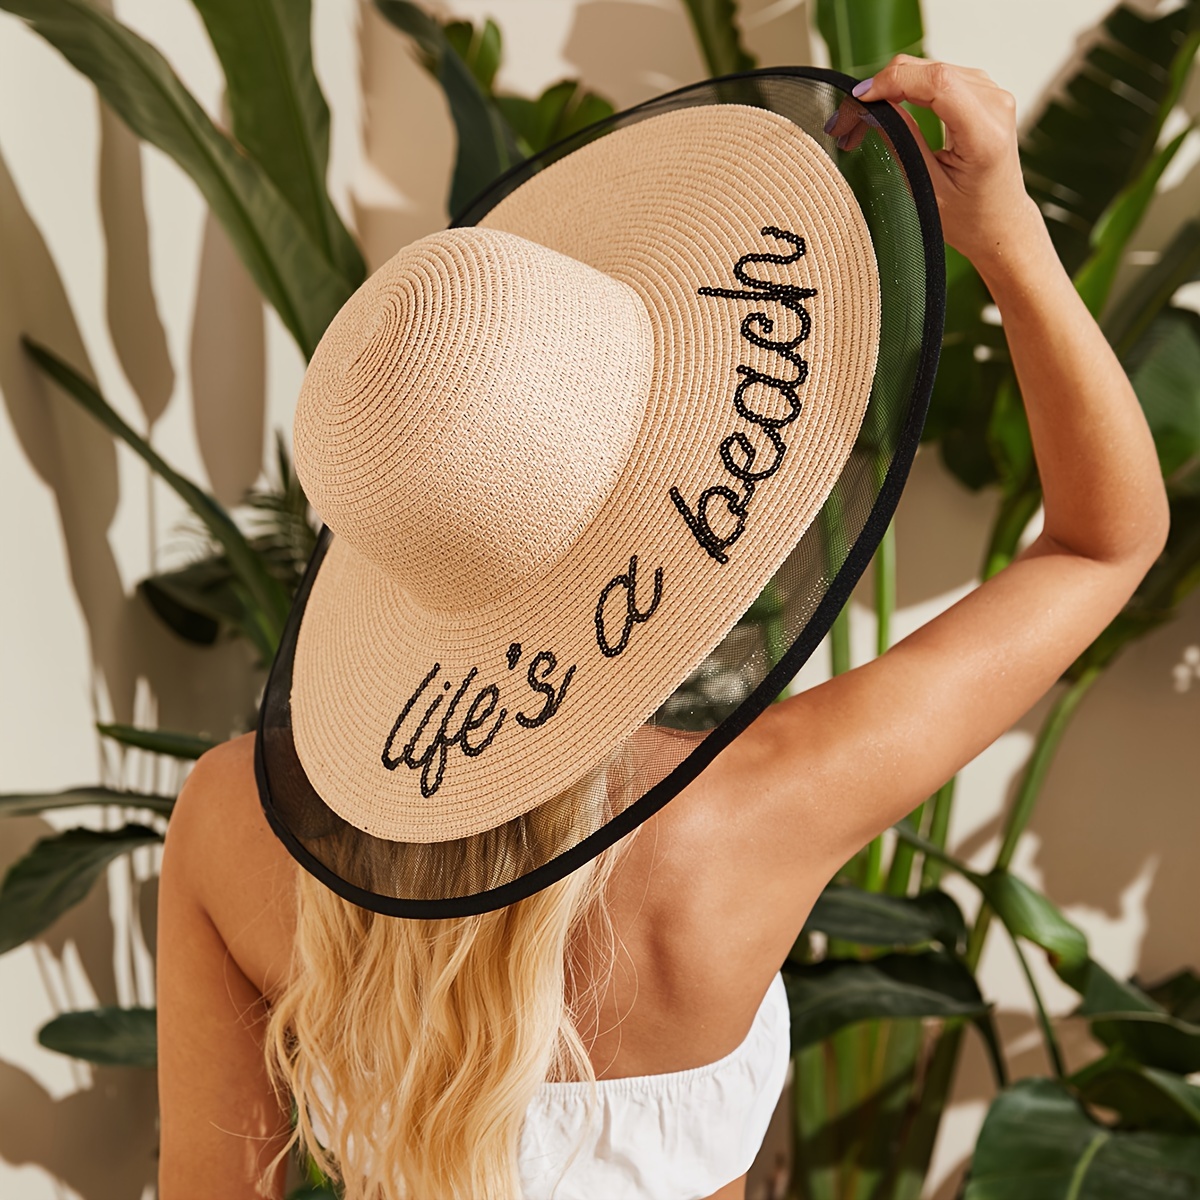 Summer Sunshade Sun Hat, Bucket Hats Personalized Wide Brim Straw Hat Sequin Embroidery Life's A Beach Lace Edge Beach Hats for Women,SUN/UV